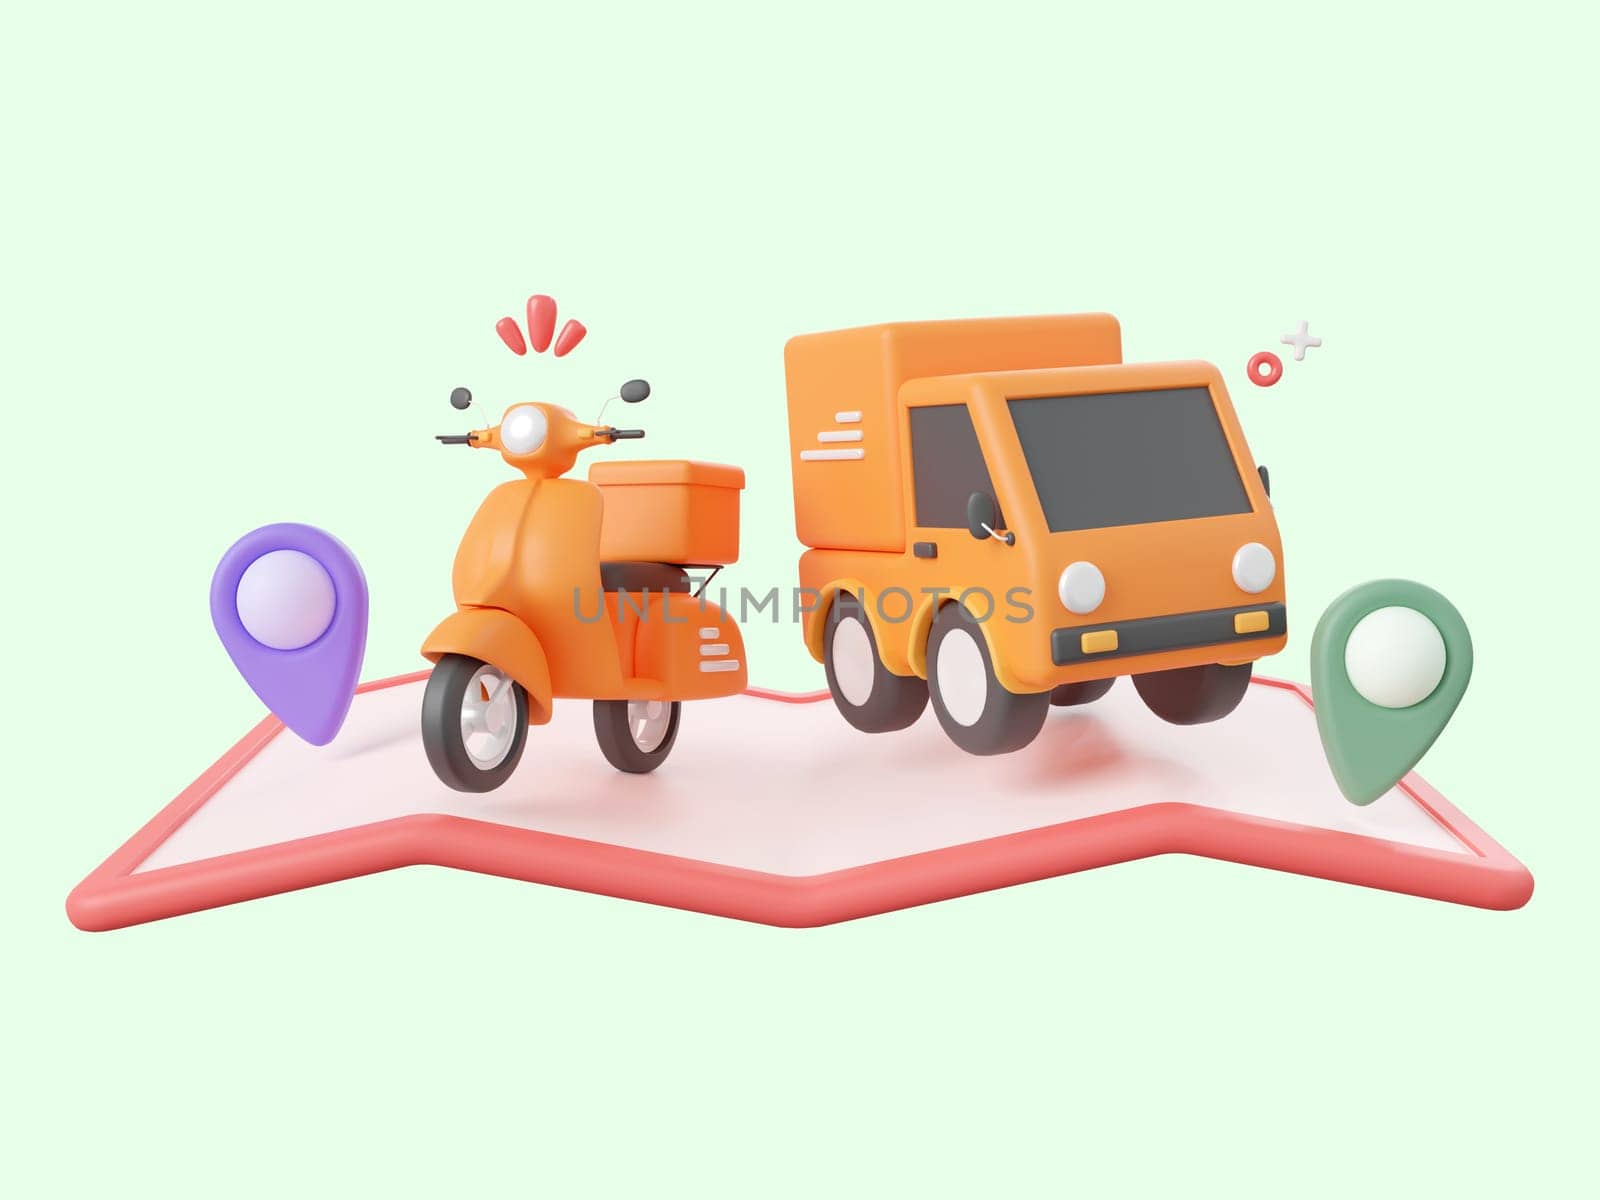 3d cartoon design illustration of Delivery service, Delivery truck and scooter with pins on map.